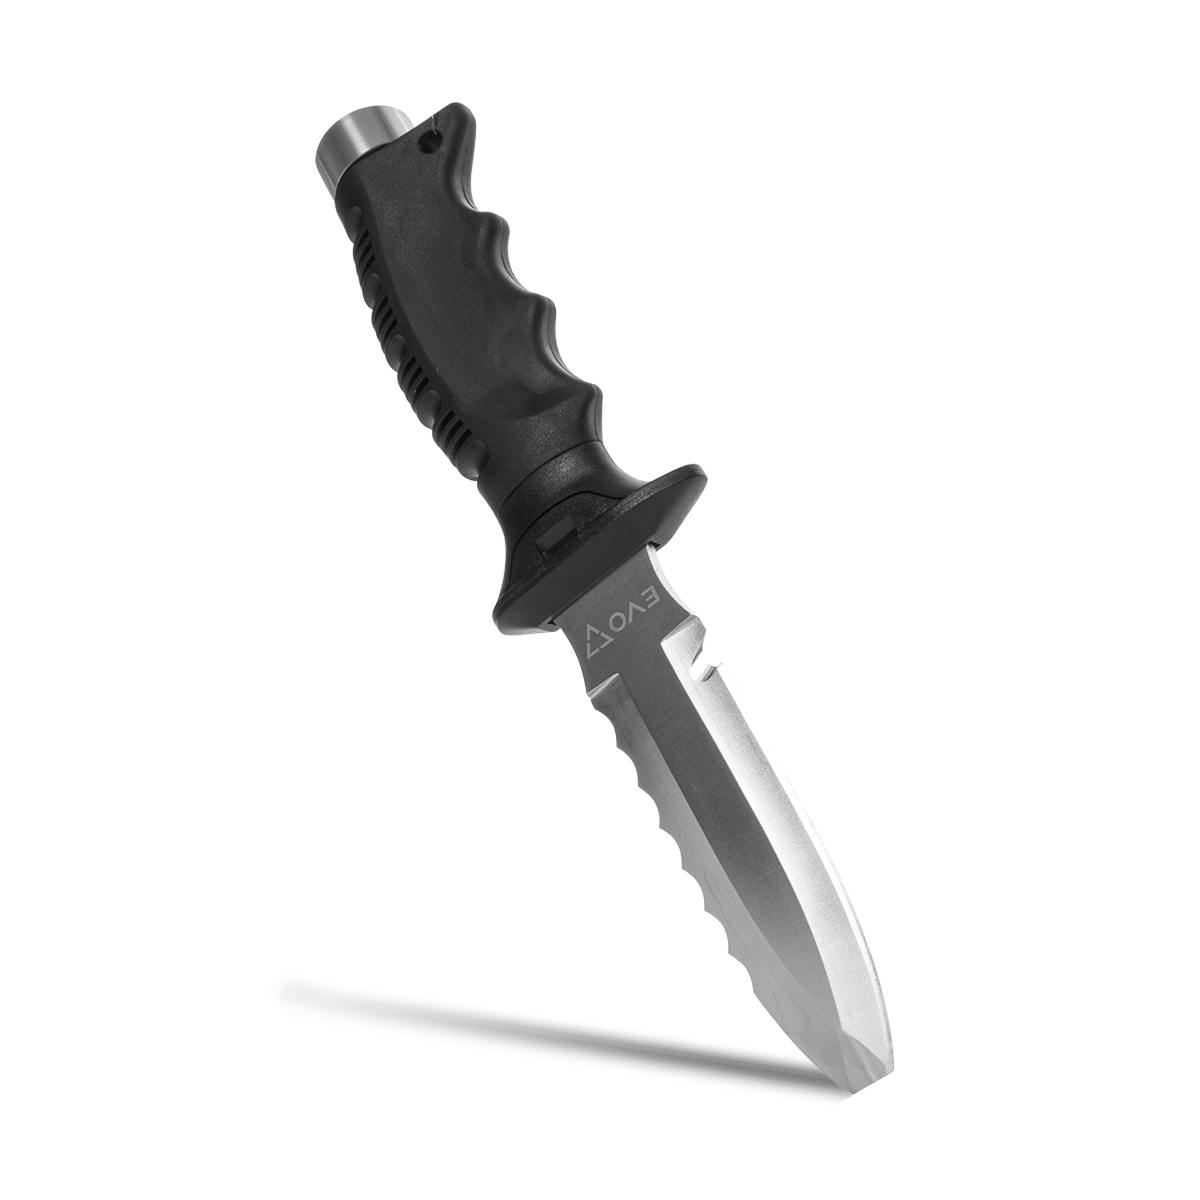 EVO Stainless Dive Knife - Blunt Tip